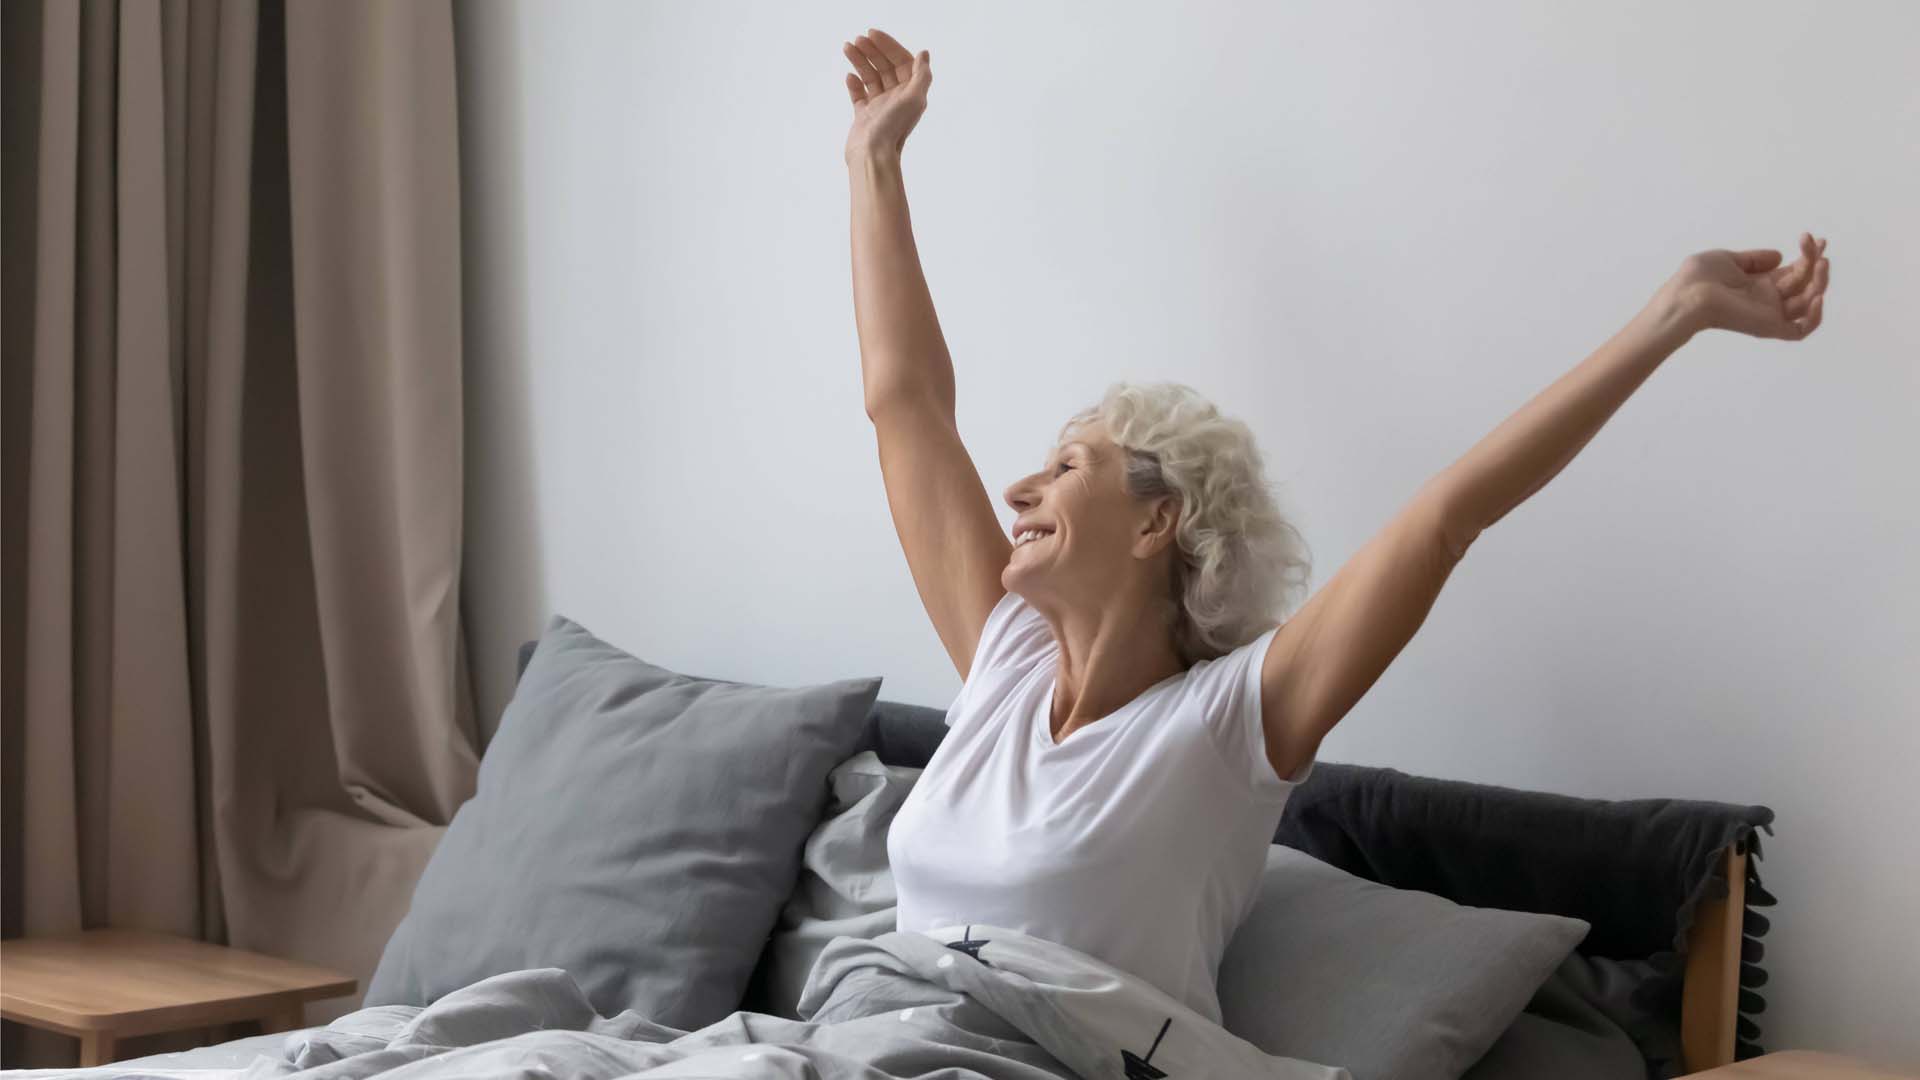 Lady awake stretching her arms up in bed after going to sleep fast